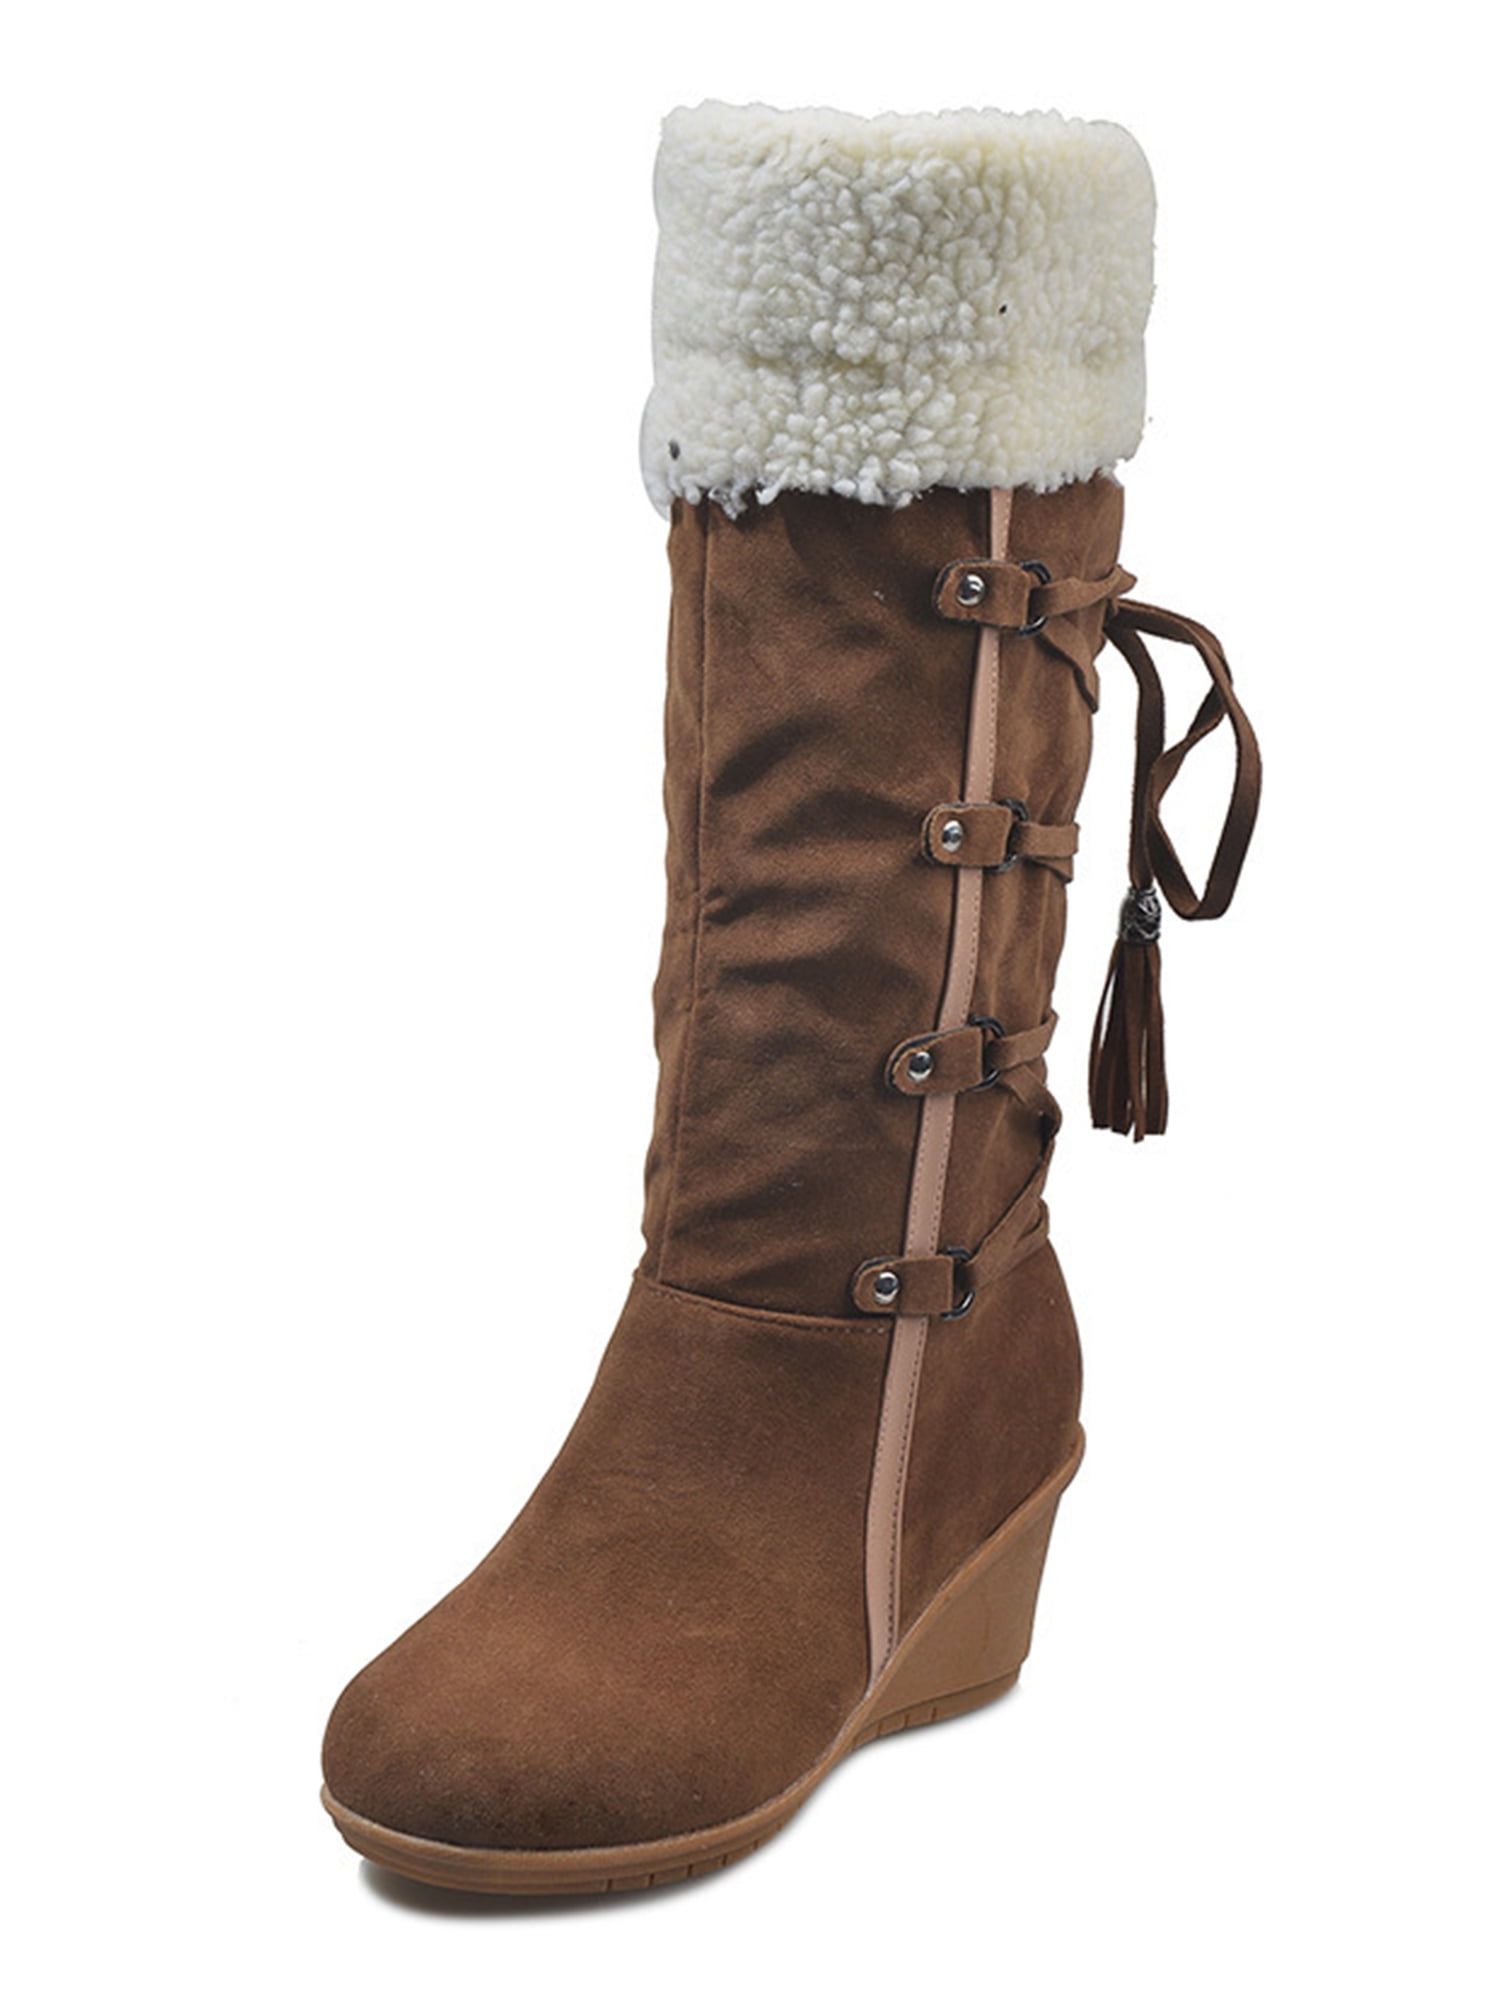 Dress Winter Snow Boots For Women Ladies Fashion Plush Fur Lined Warm Suede Round Toe Wedge Platform Slip On Mid Calf Boots Cozy Fleece Lining Chunky Bottom Mid Heels Short Boots For Christmas 